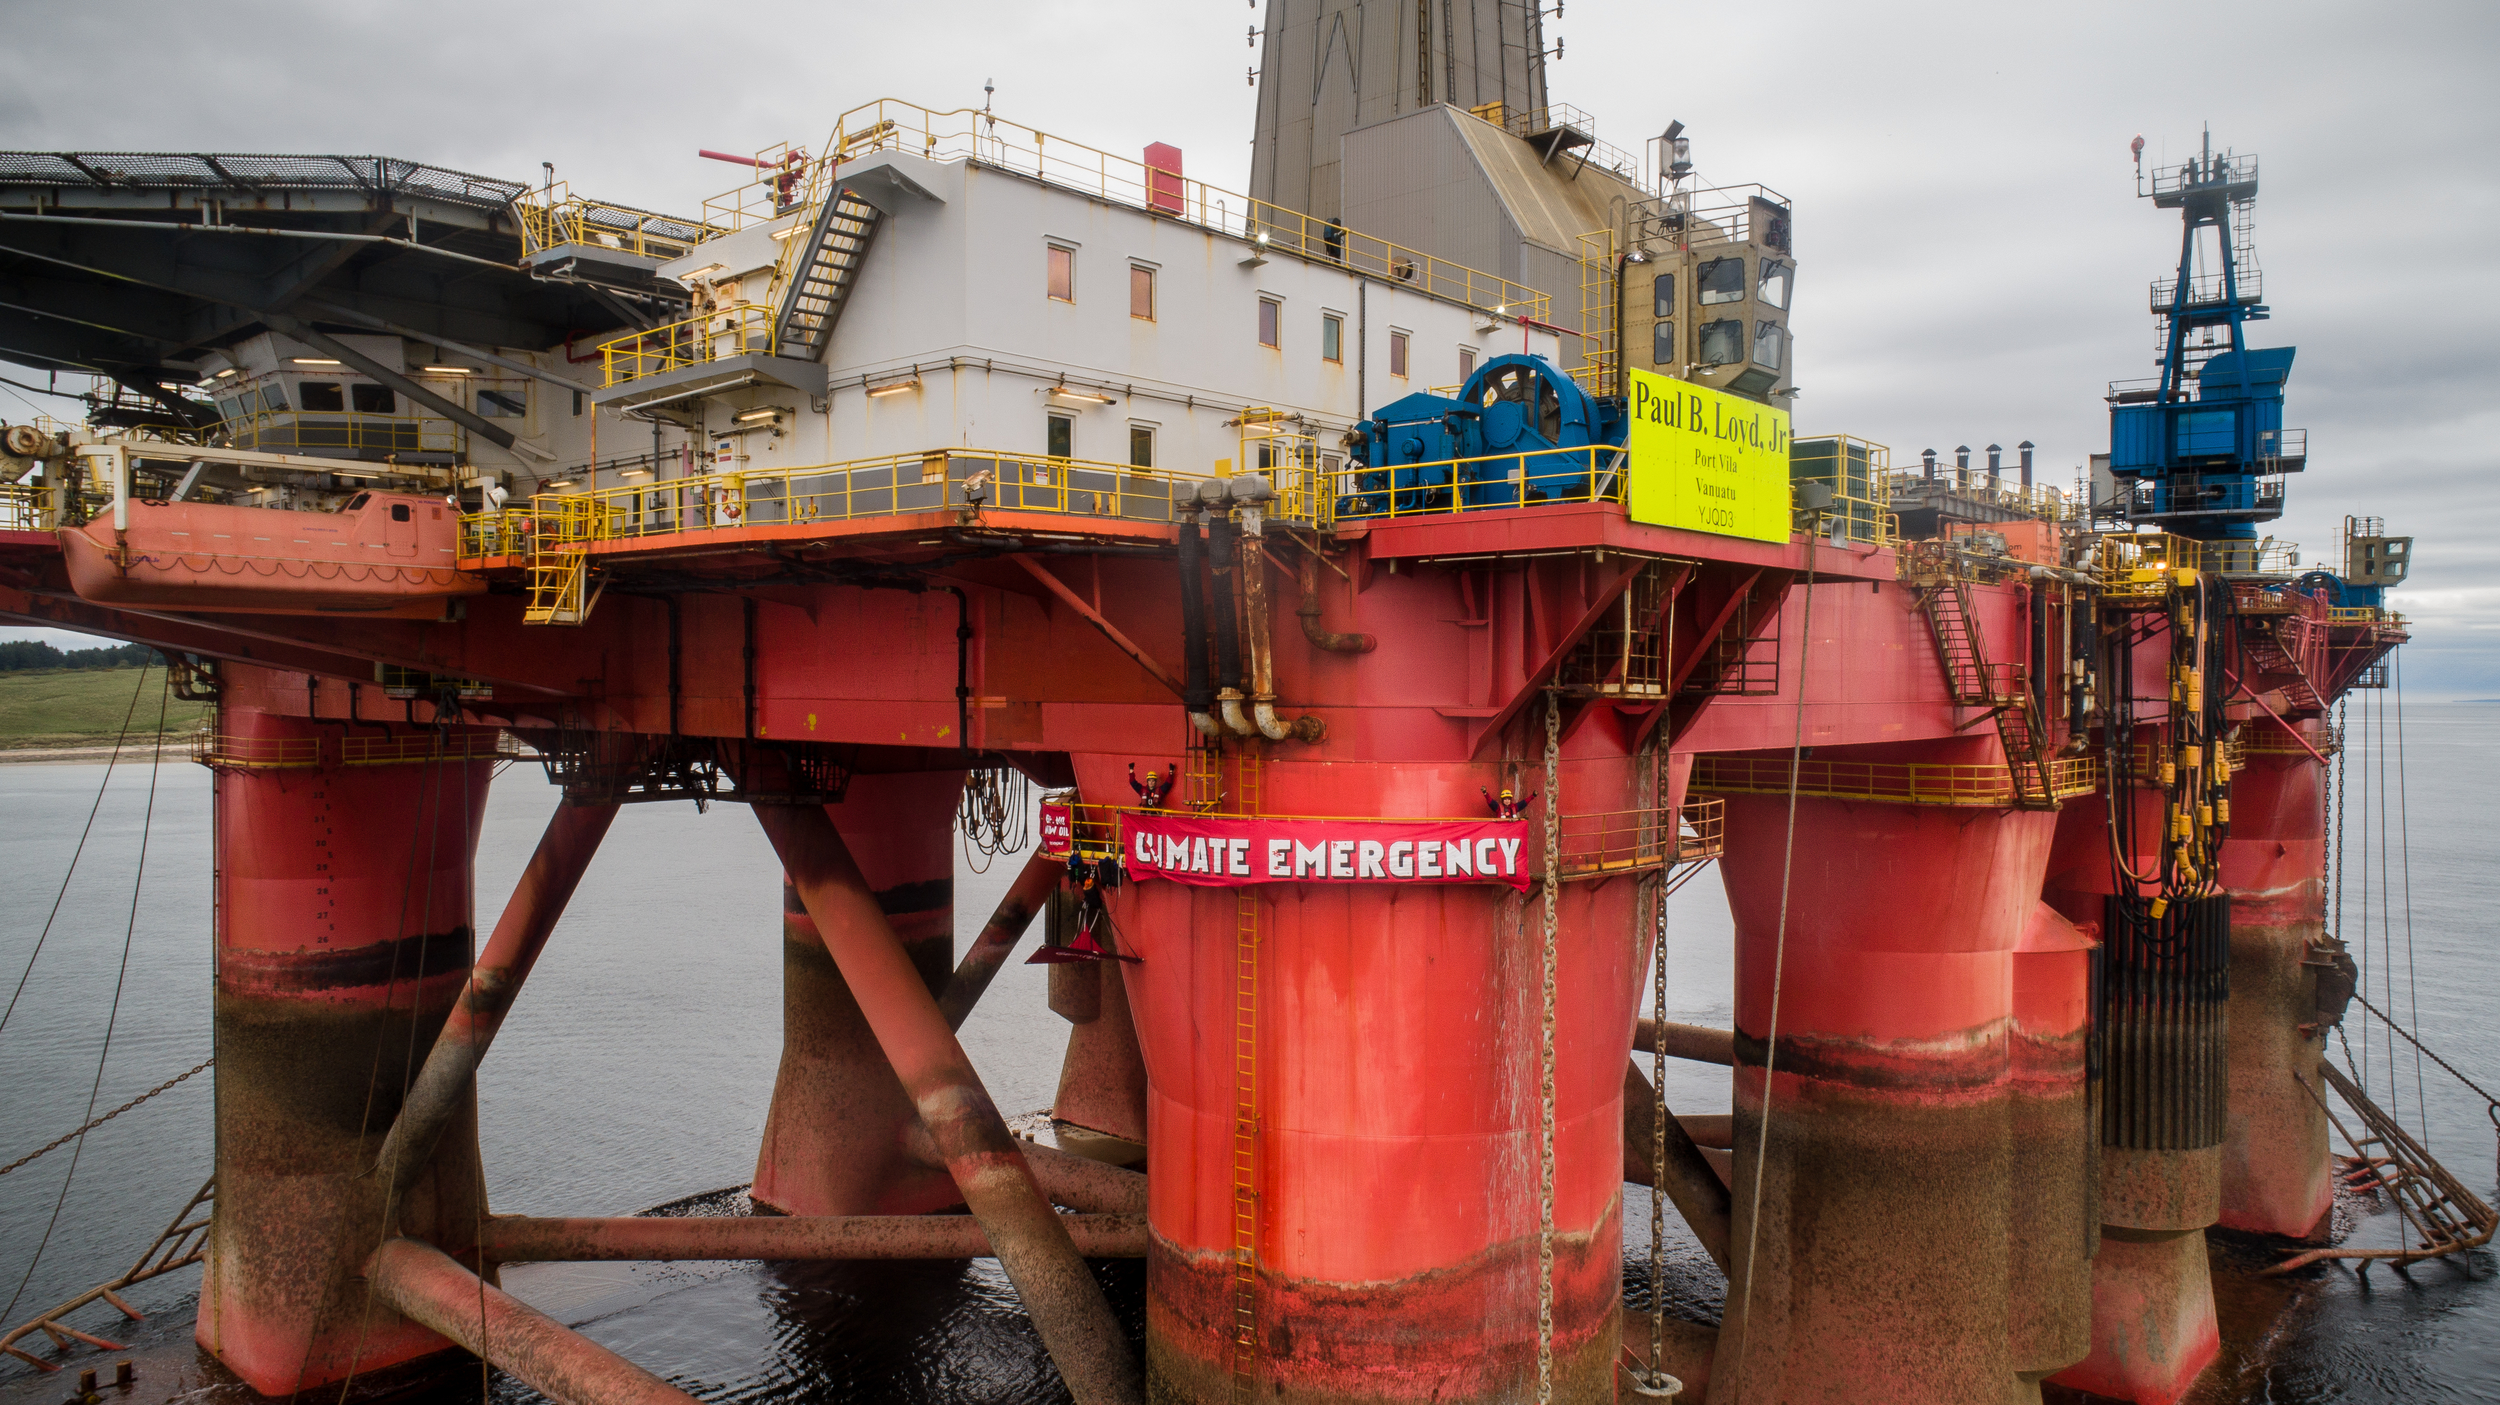 Oil: Activists occupied the rig.